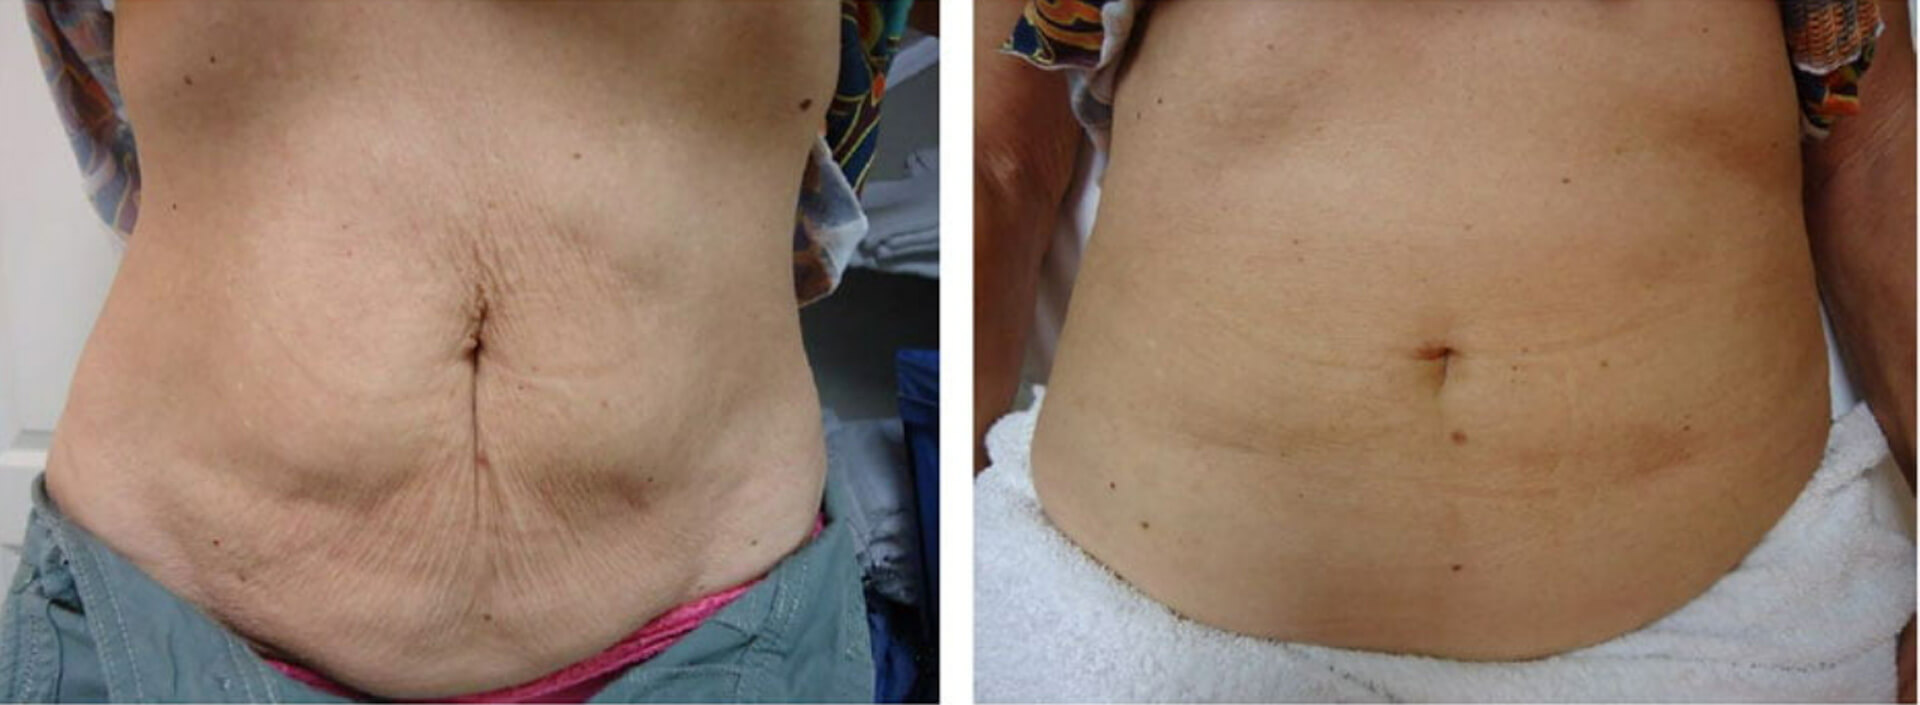 Before and After VelaShape